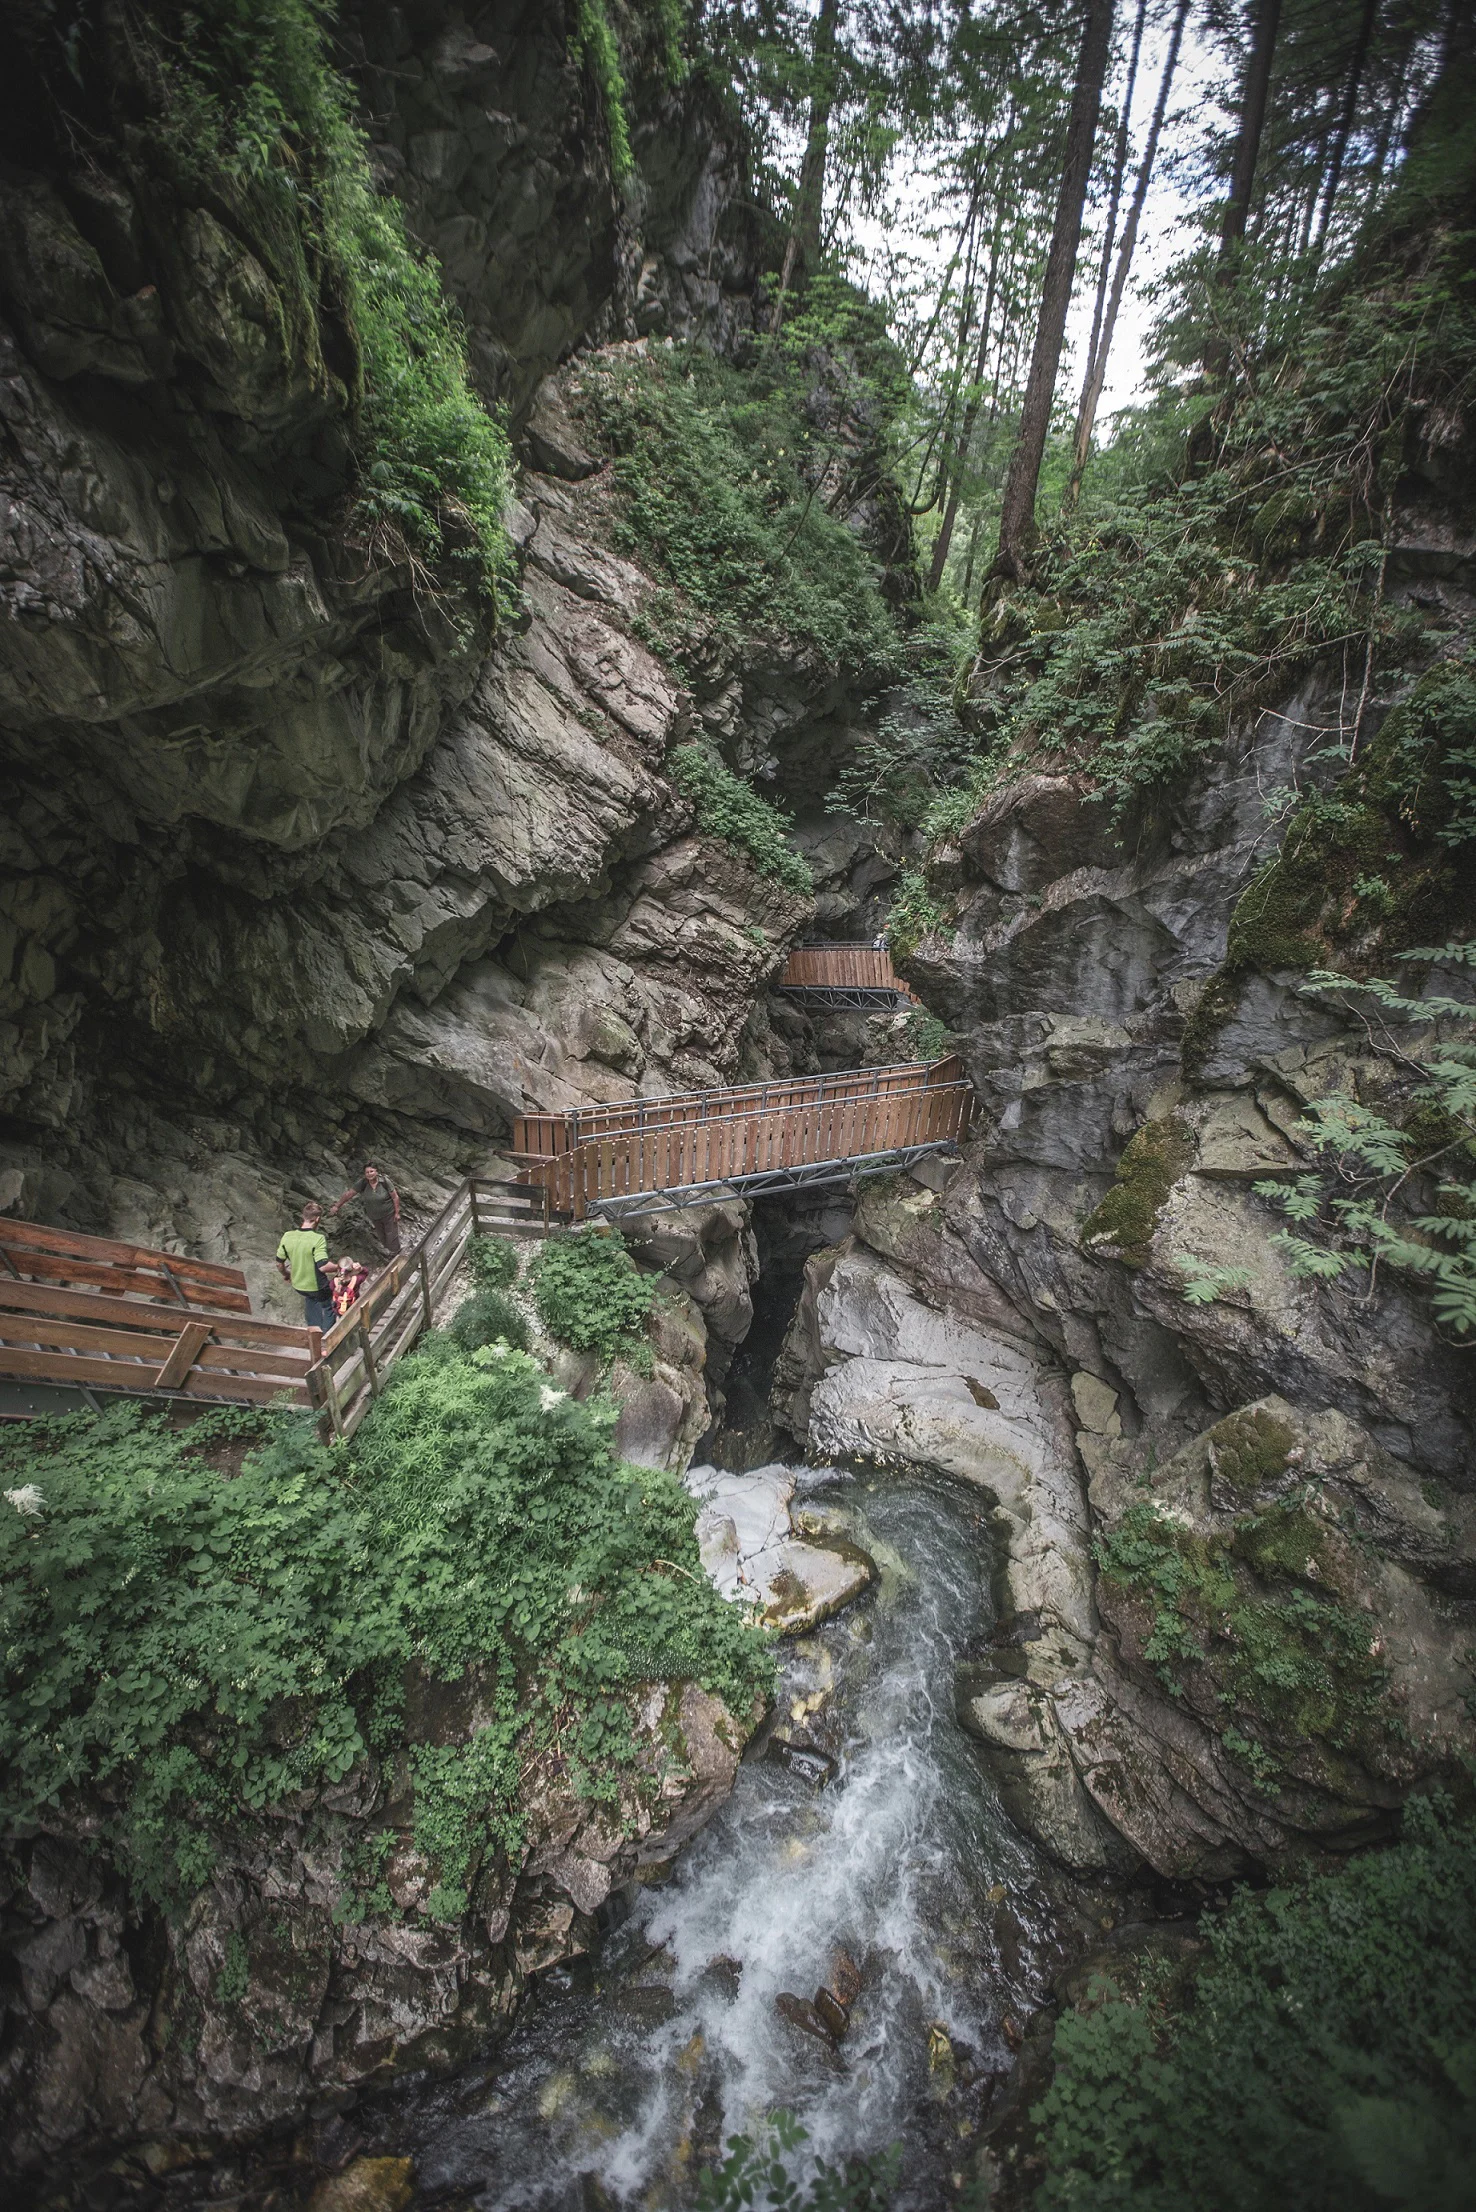 Two people at the natural monument of the Gilfenklamm gorge